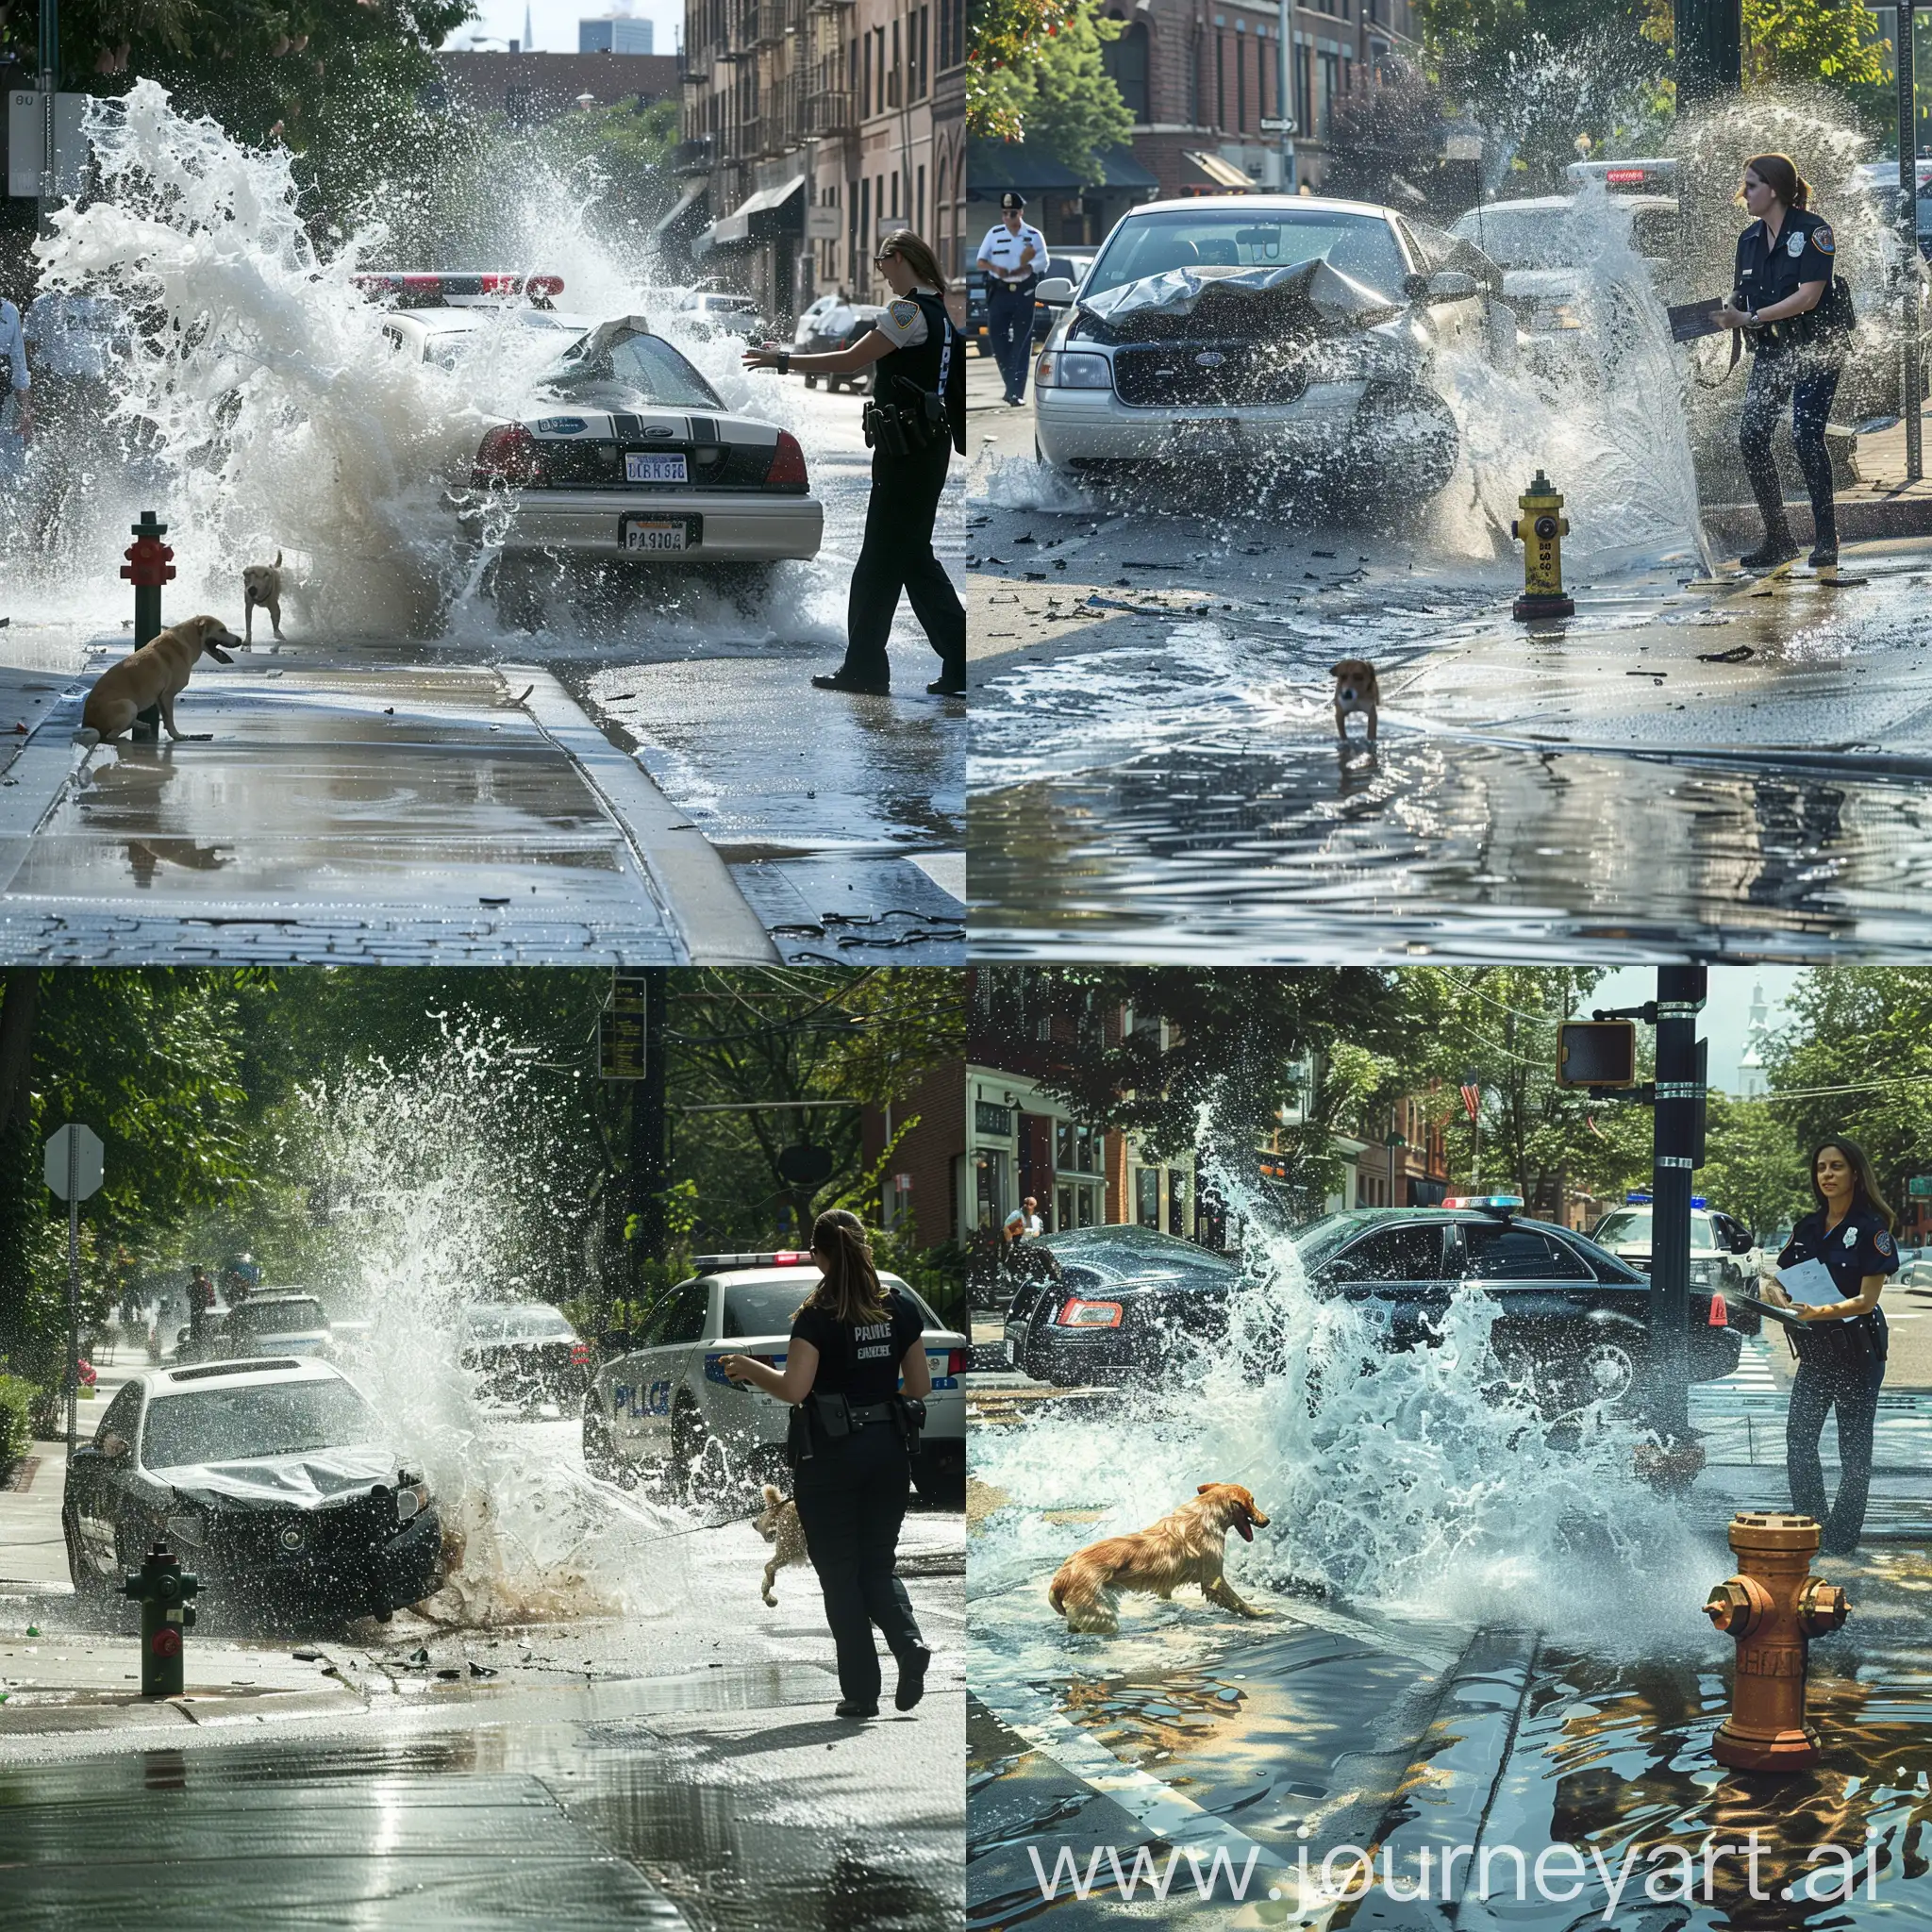 car accident by a student driver, car hit a fire hydrant, water splashing all over, dog on a sidewalk, policewoman reporting the incident